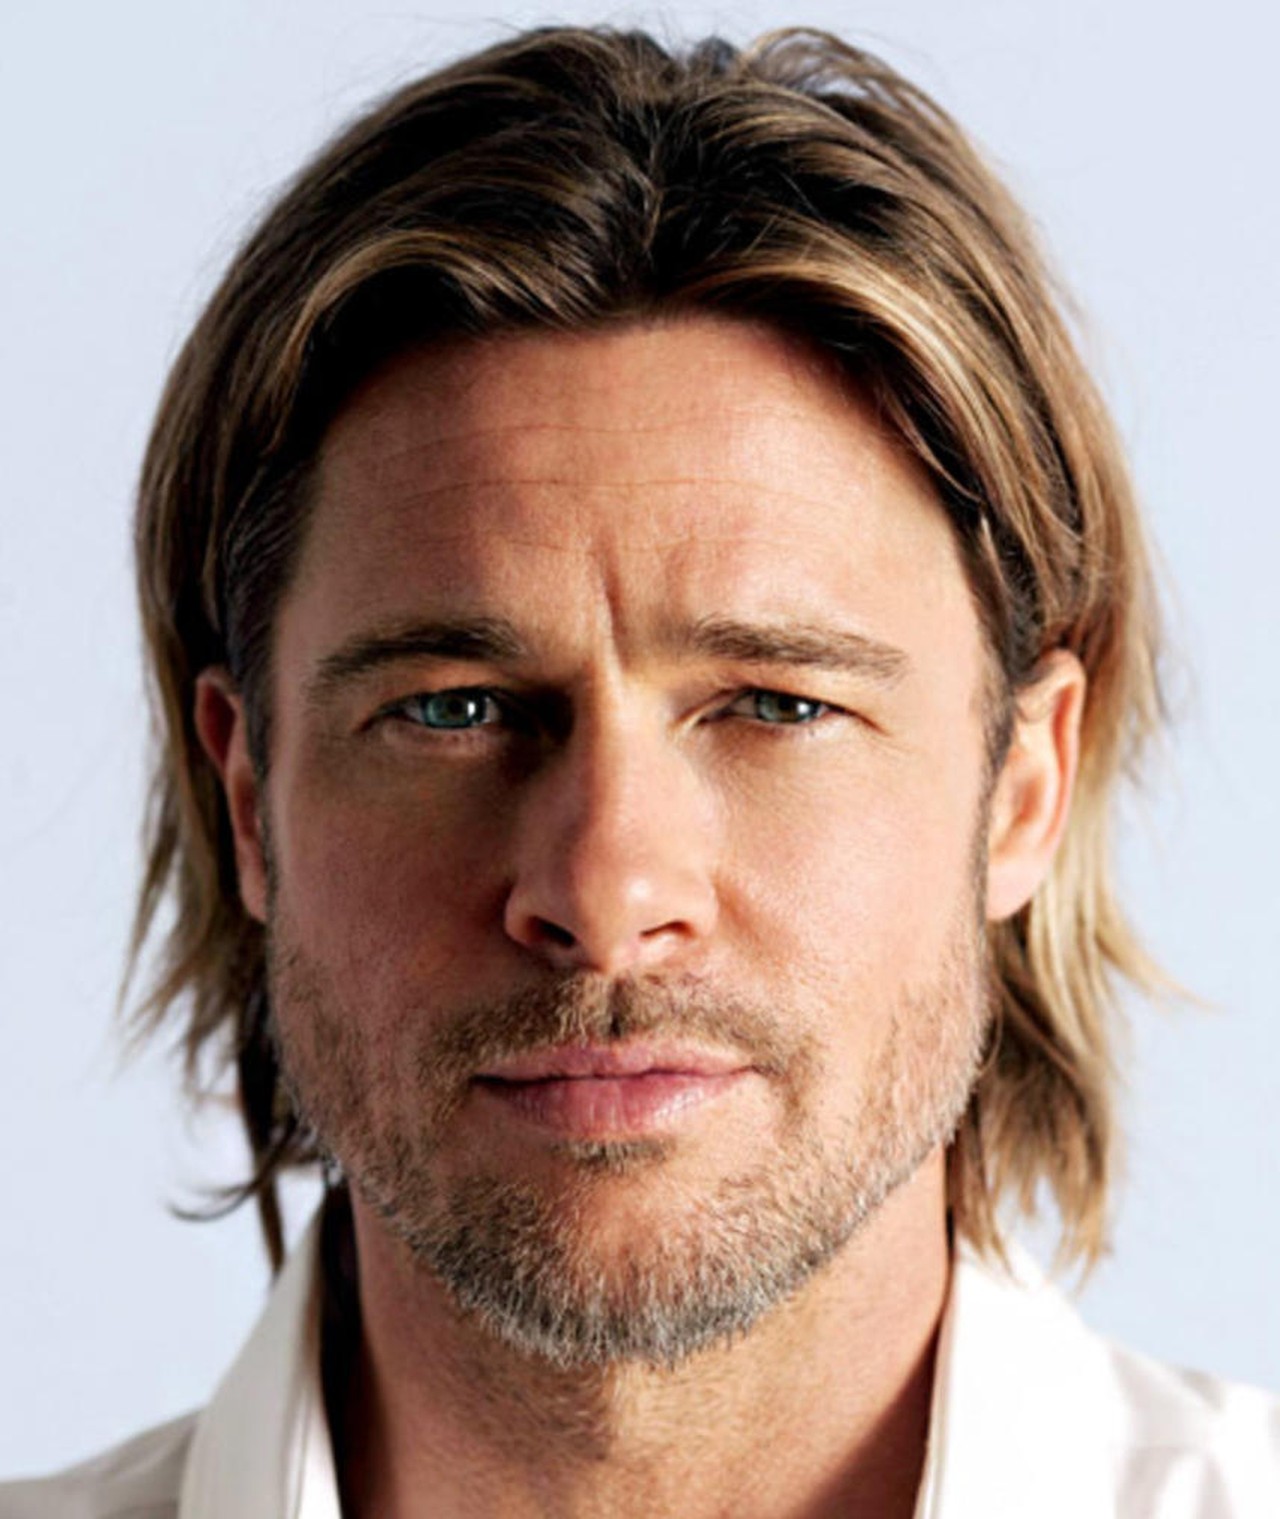 Brad Pitt (Actor and Producer) - On This Day